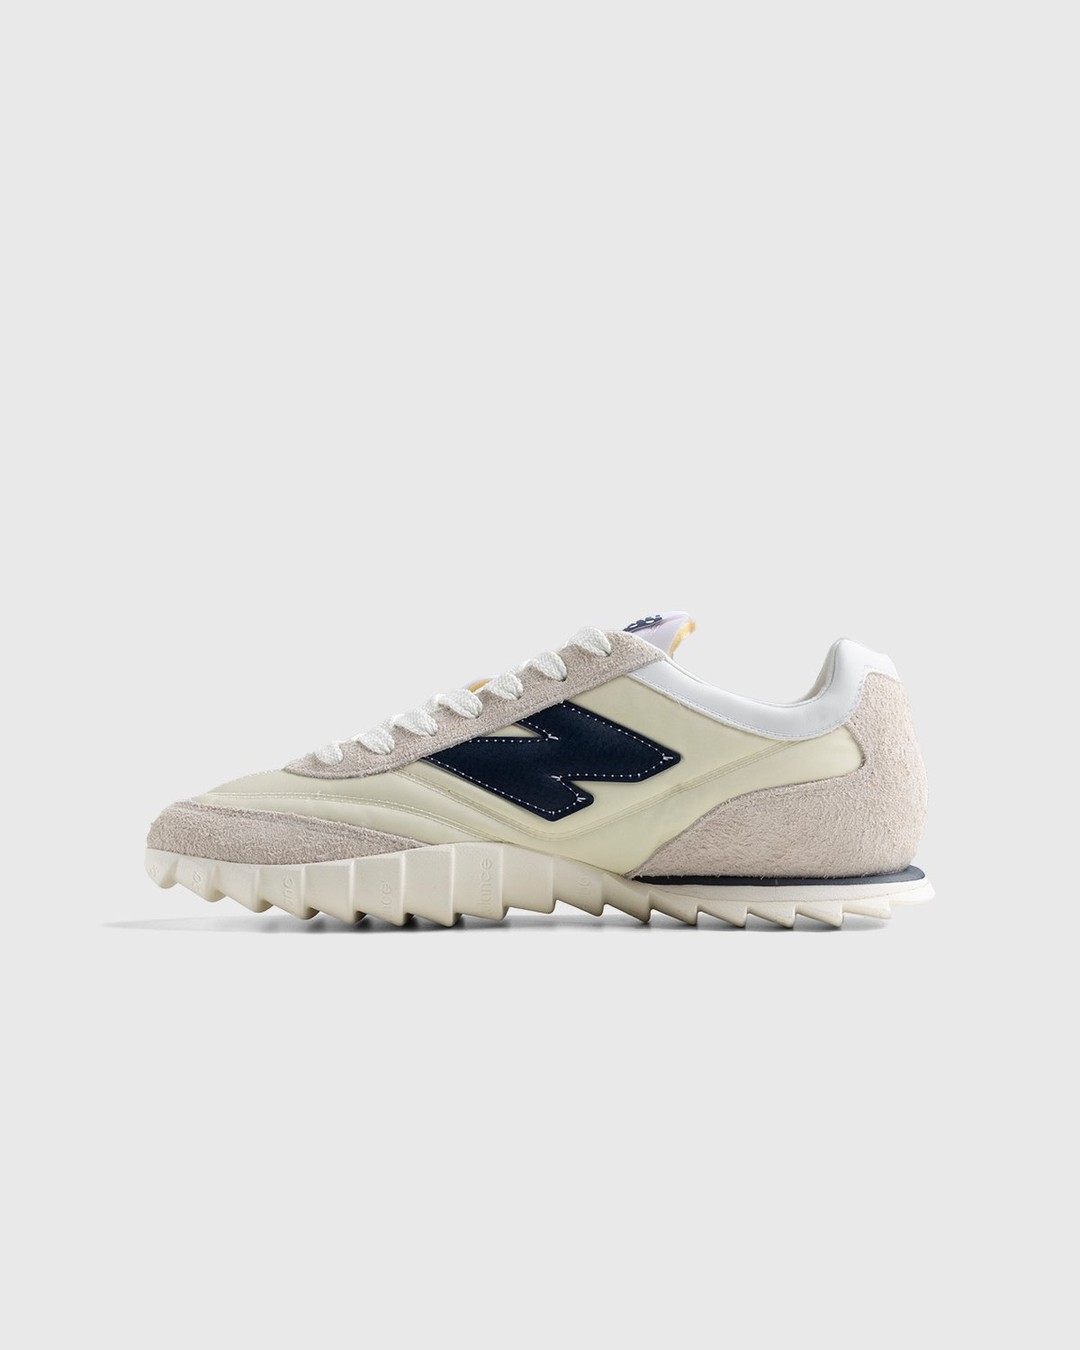 Donald Glover x New Balance – URC30DD Sea Salt - Low Top Sneakers - White - Image 2